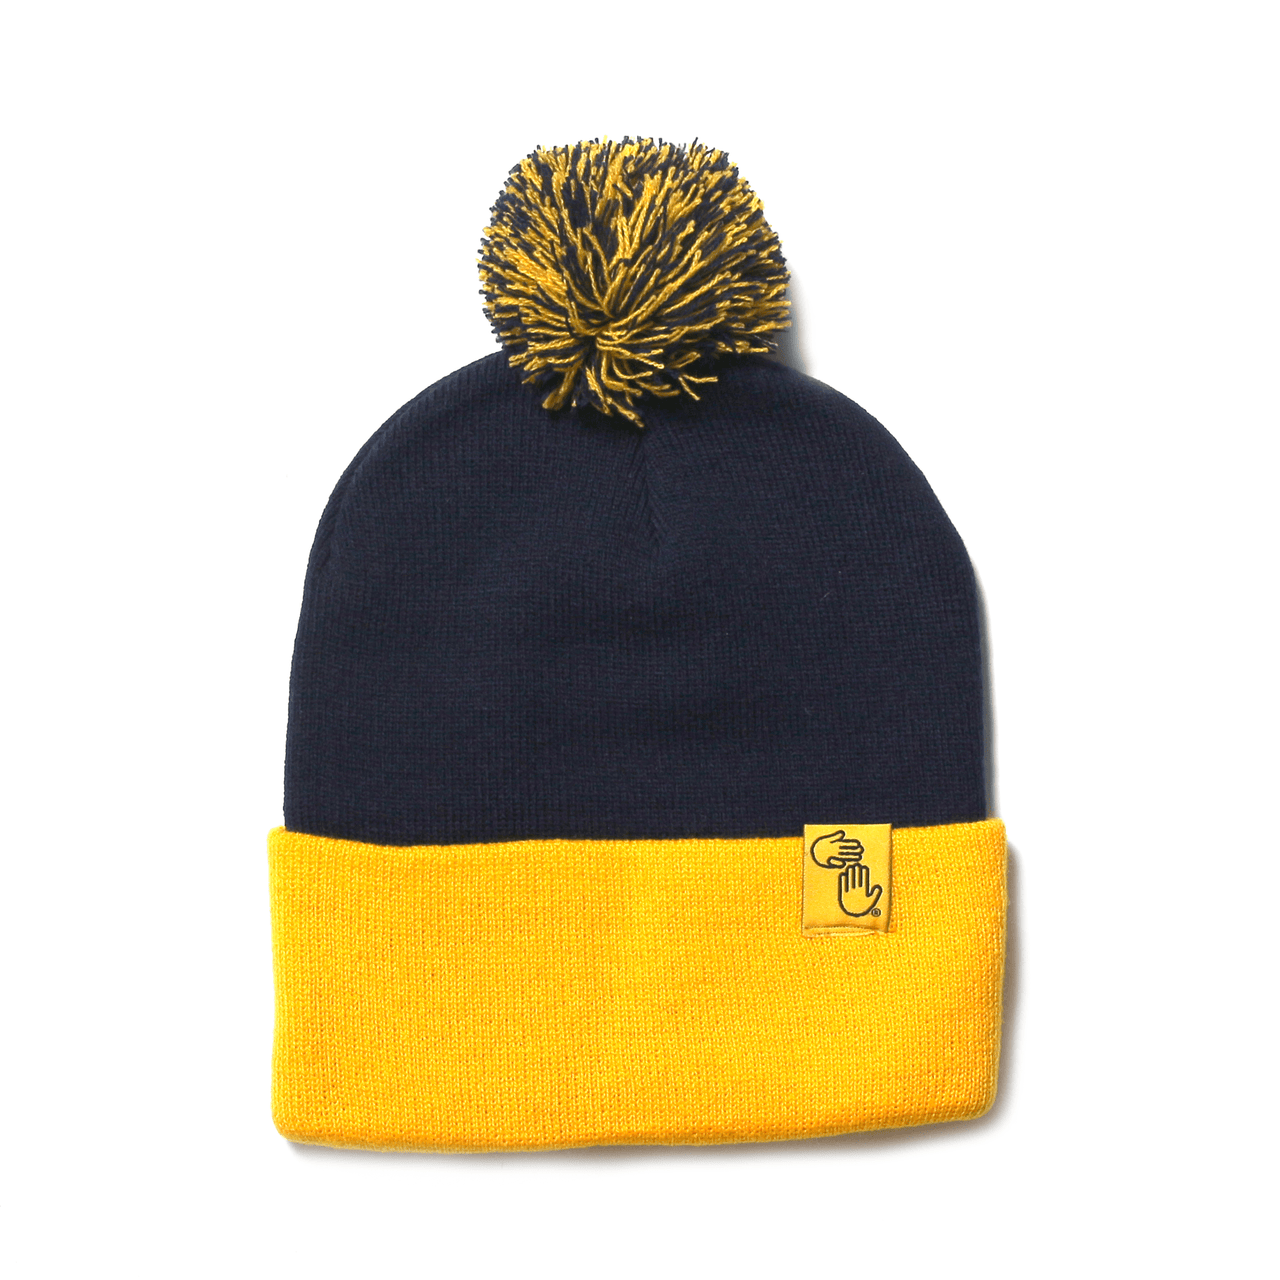 Pom Beanie (Navy and Gold)